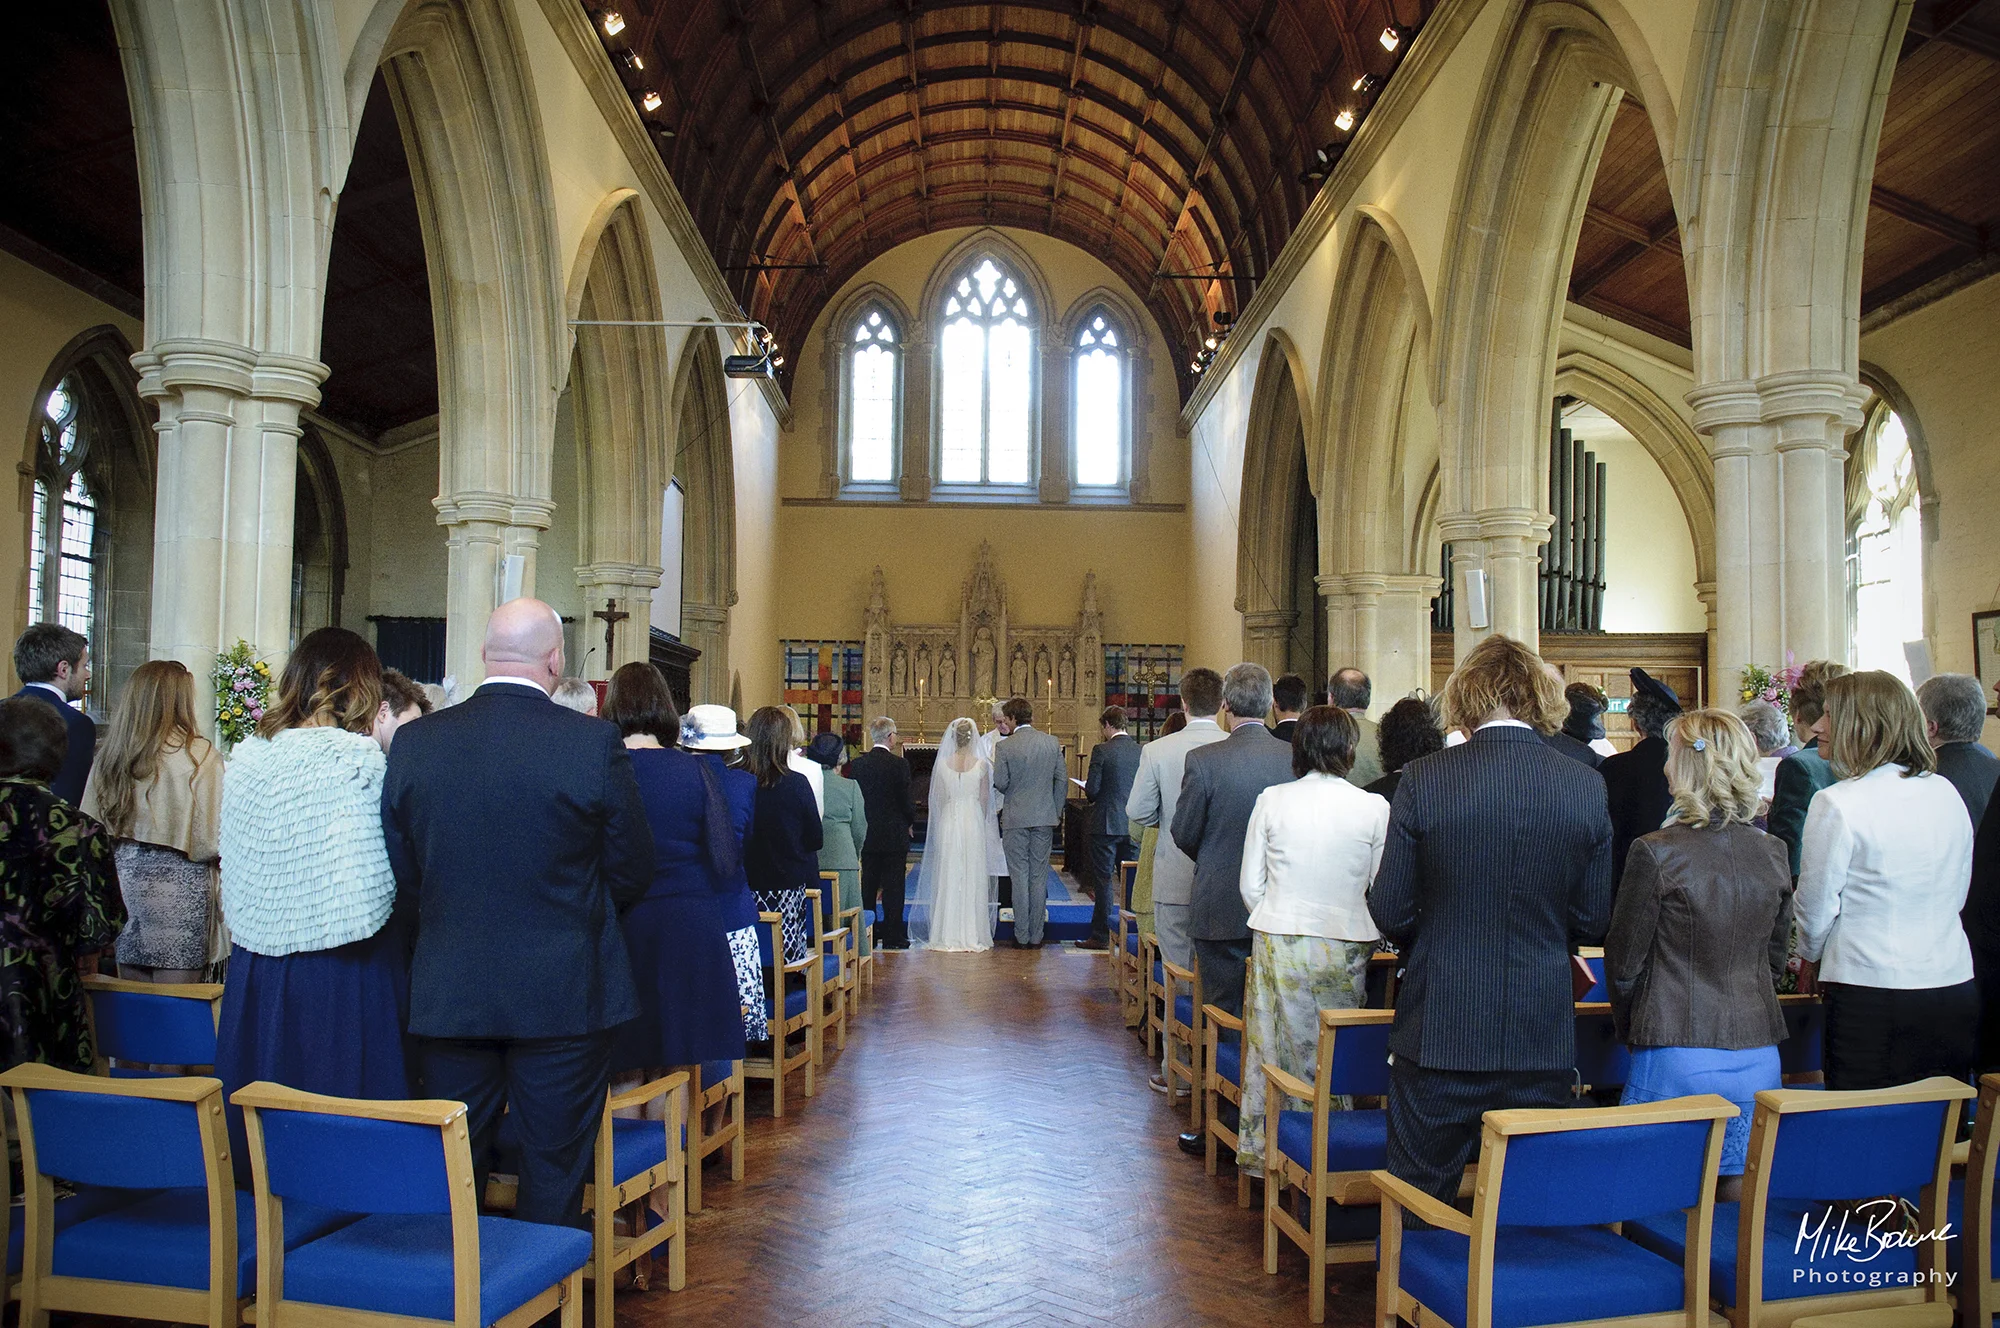 Church interior with pillars and arches as the wedding party and congregation stand